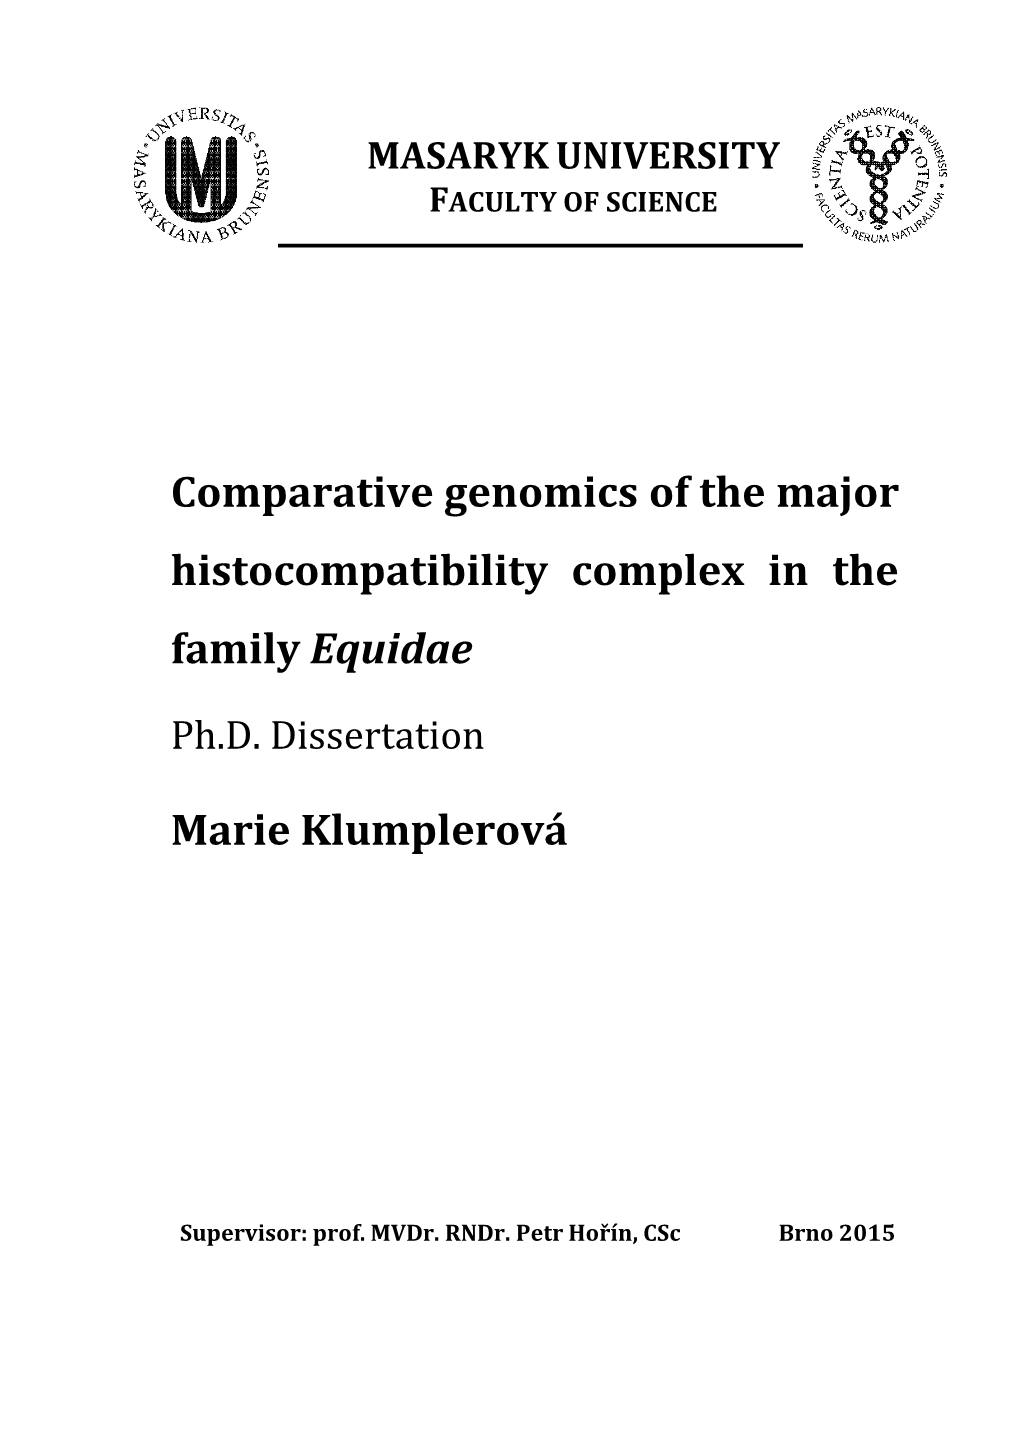 Comparative Genomics of the Major Histocompatibility Complex in the Family Equidae